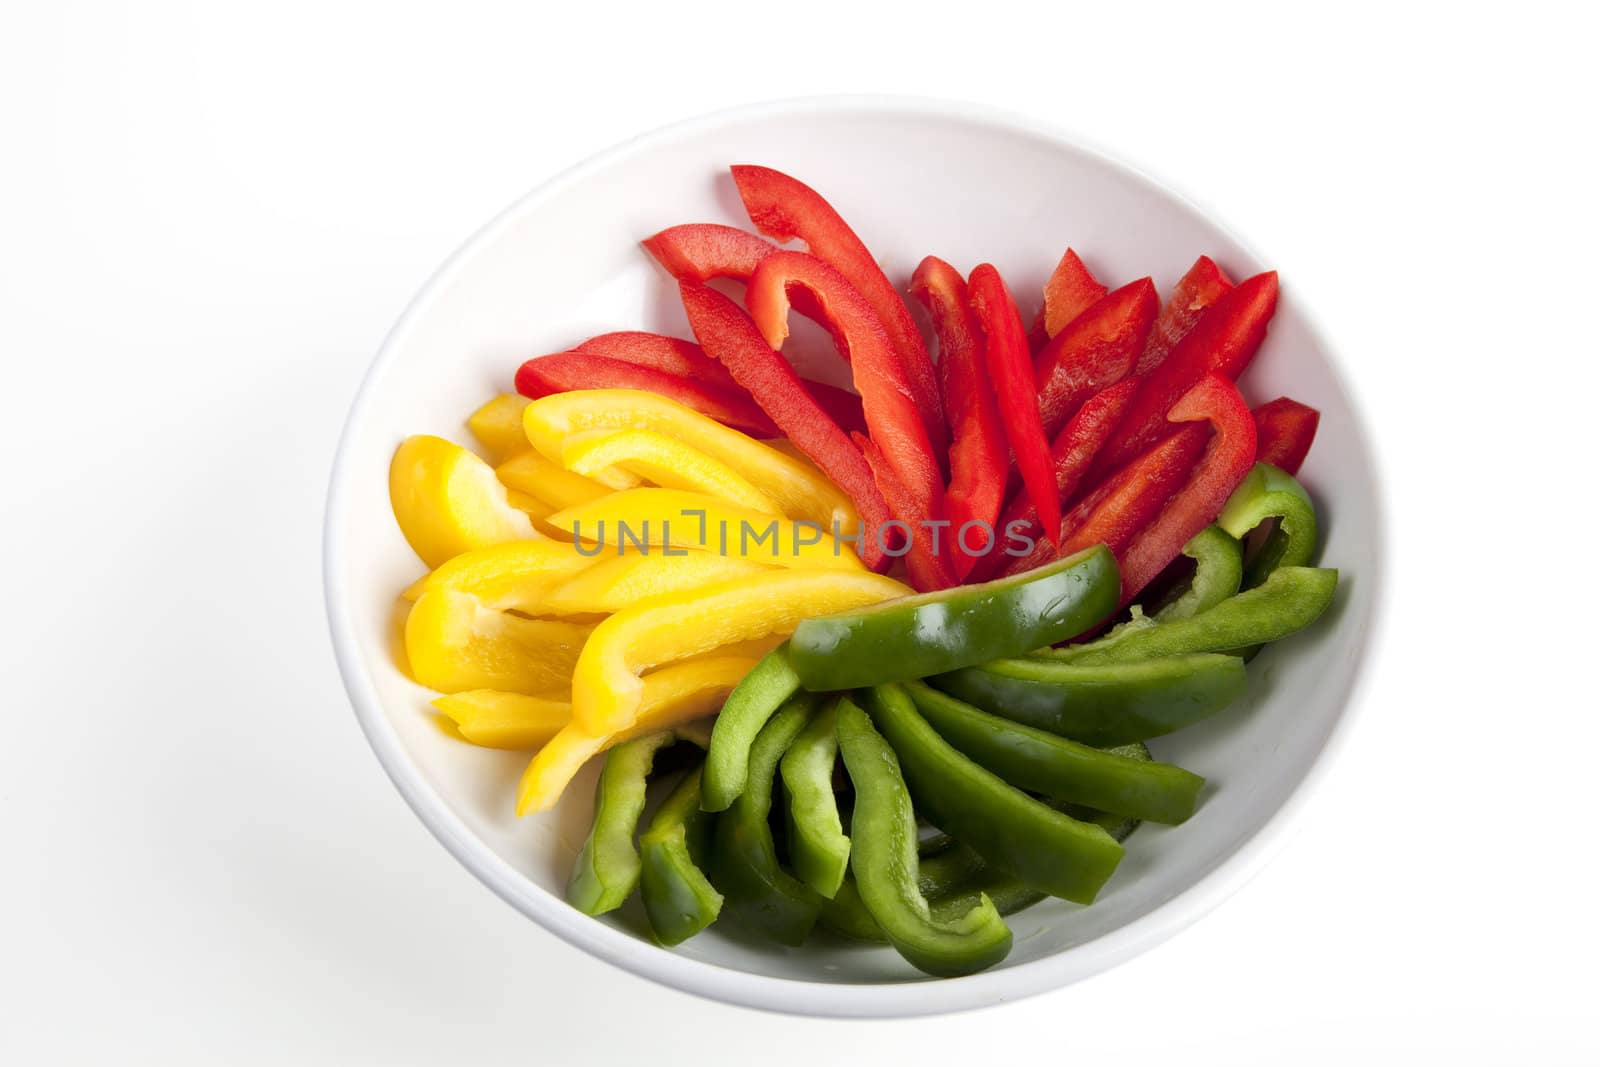 Bowl of red, yellow and green slices of bell peppers in white bowl on white background.